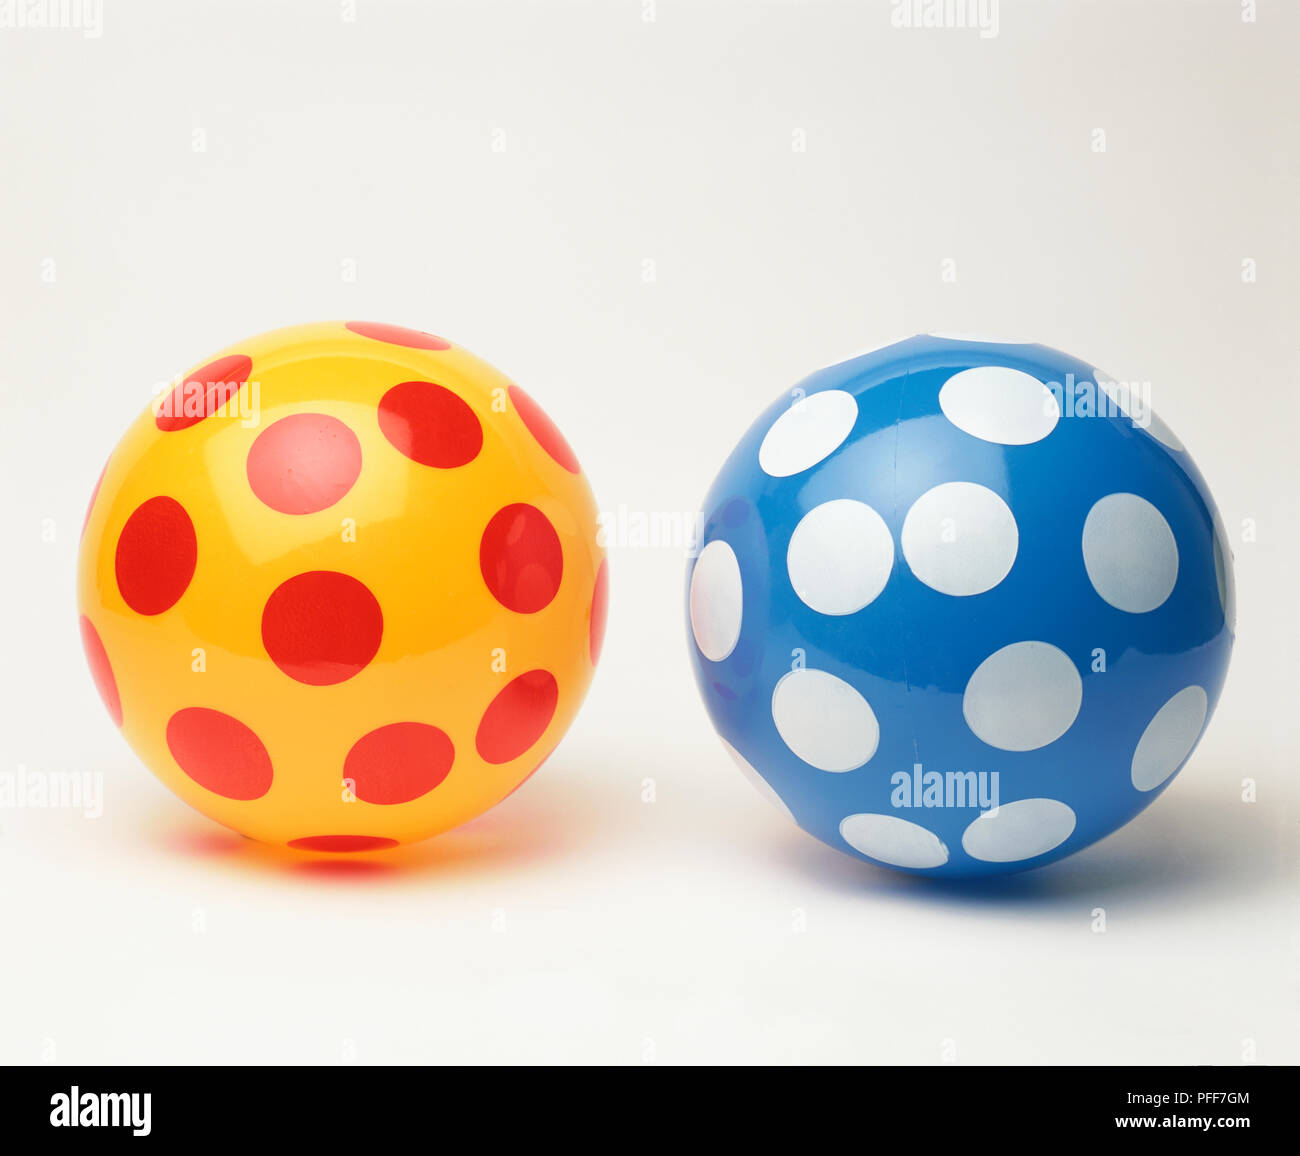 Yellow plastic toy ball with red polka dots, next to blue plastic ball with white polka dots. Stock Photo